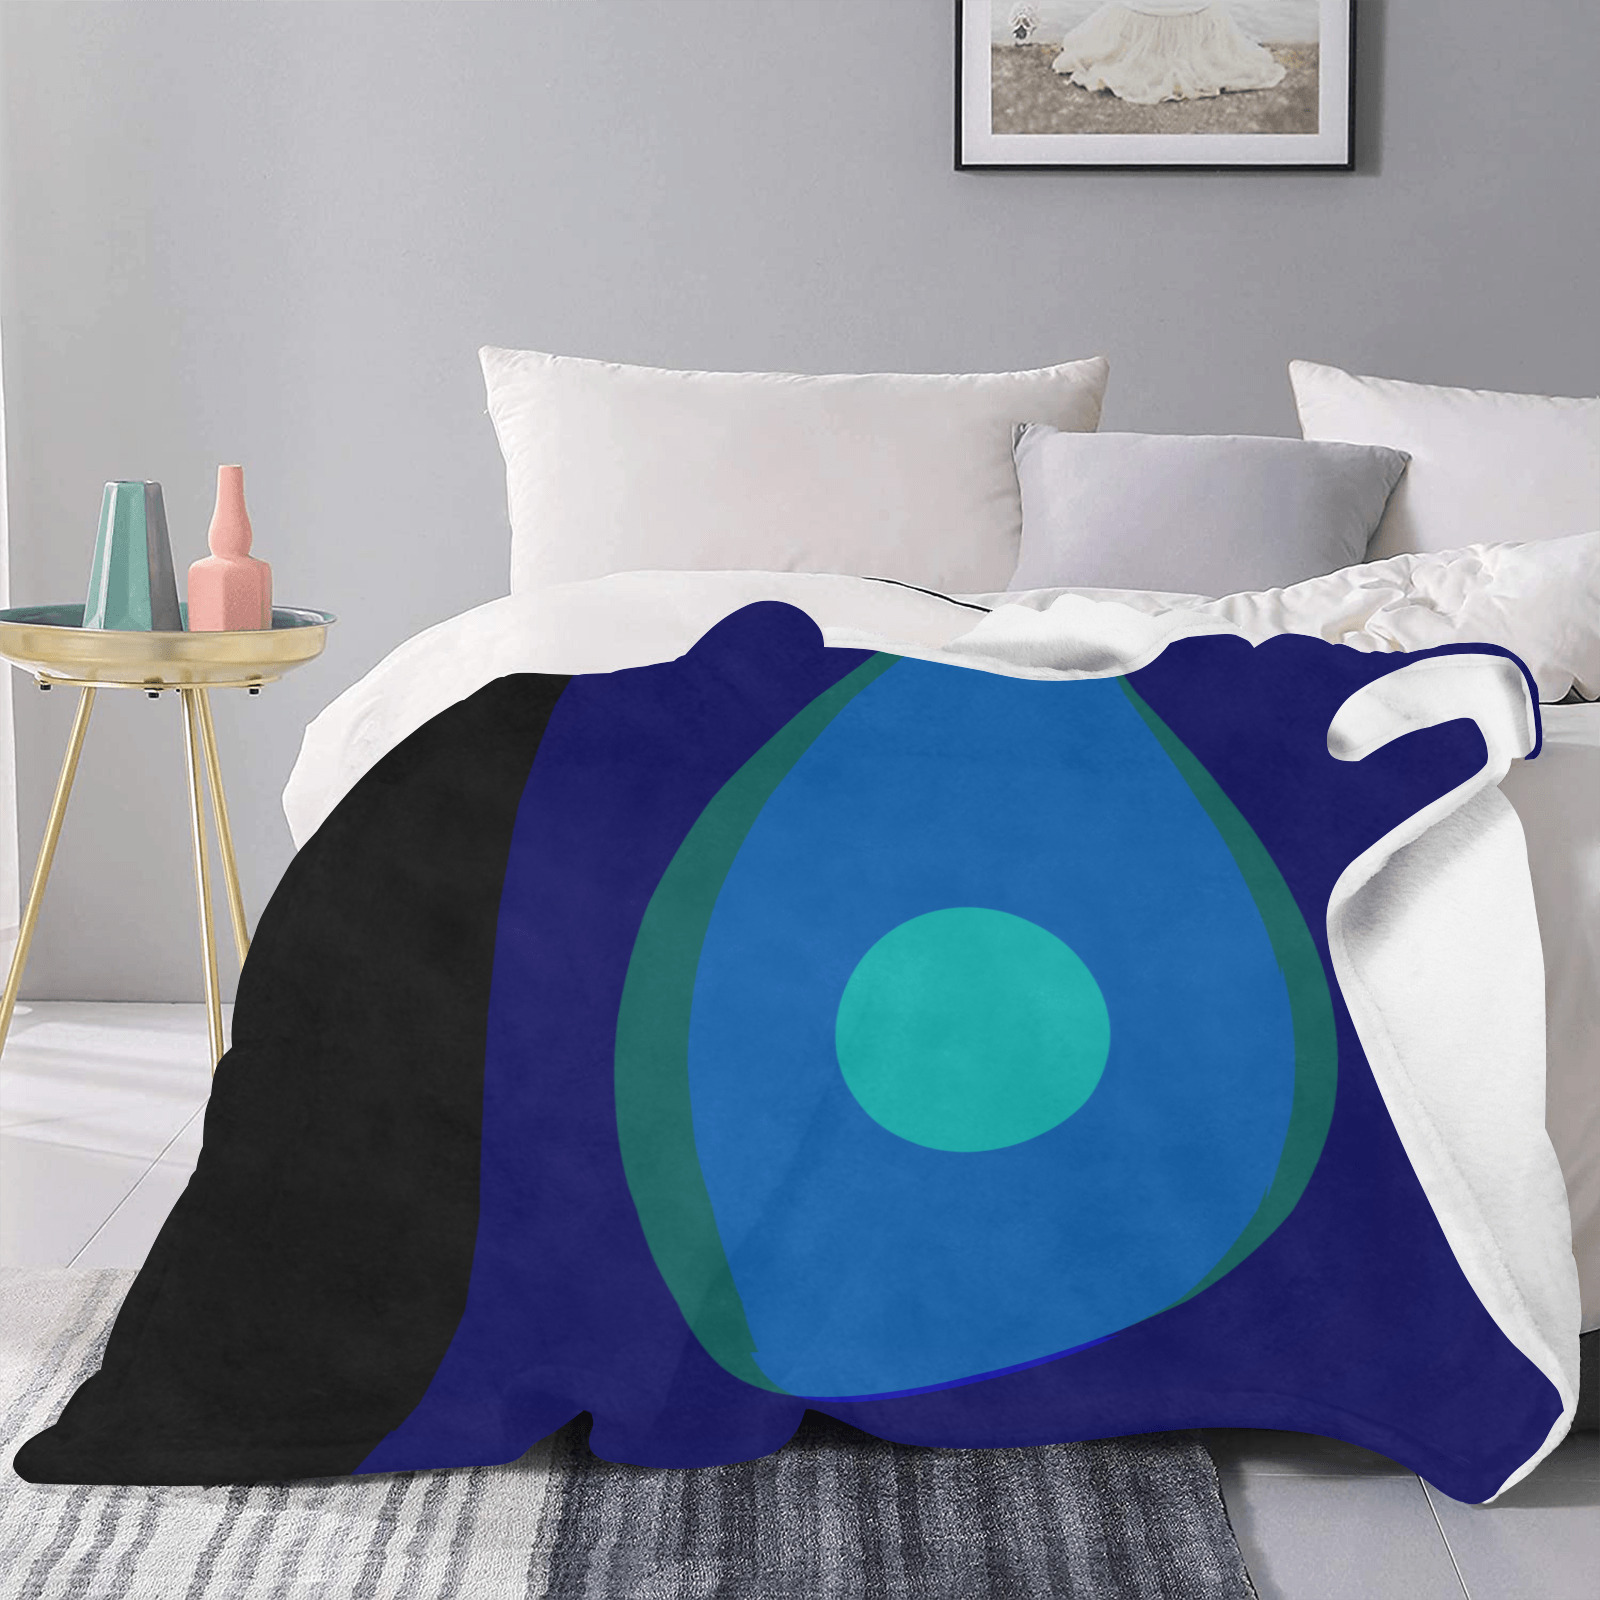 Dimensional Blue Abstract 915 Ultra-Soft Micro Fleece Blanket 50"x60" (Thick)